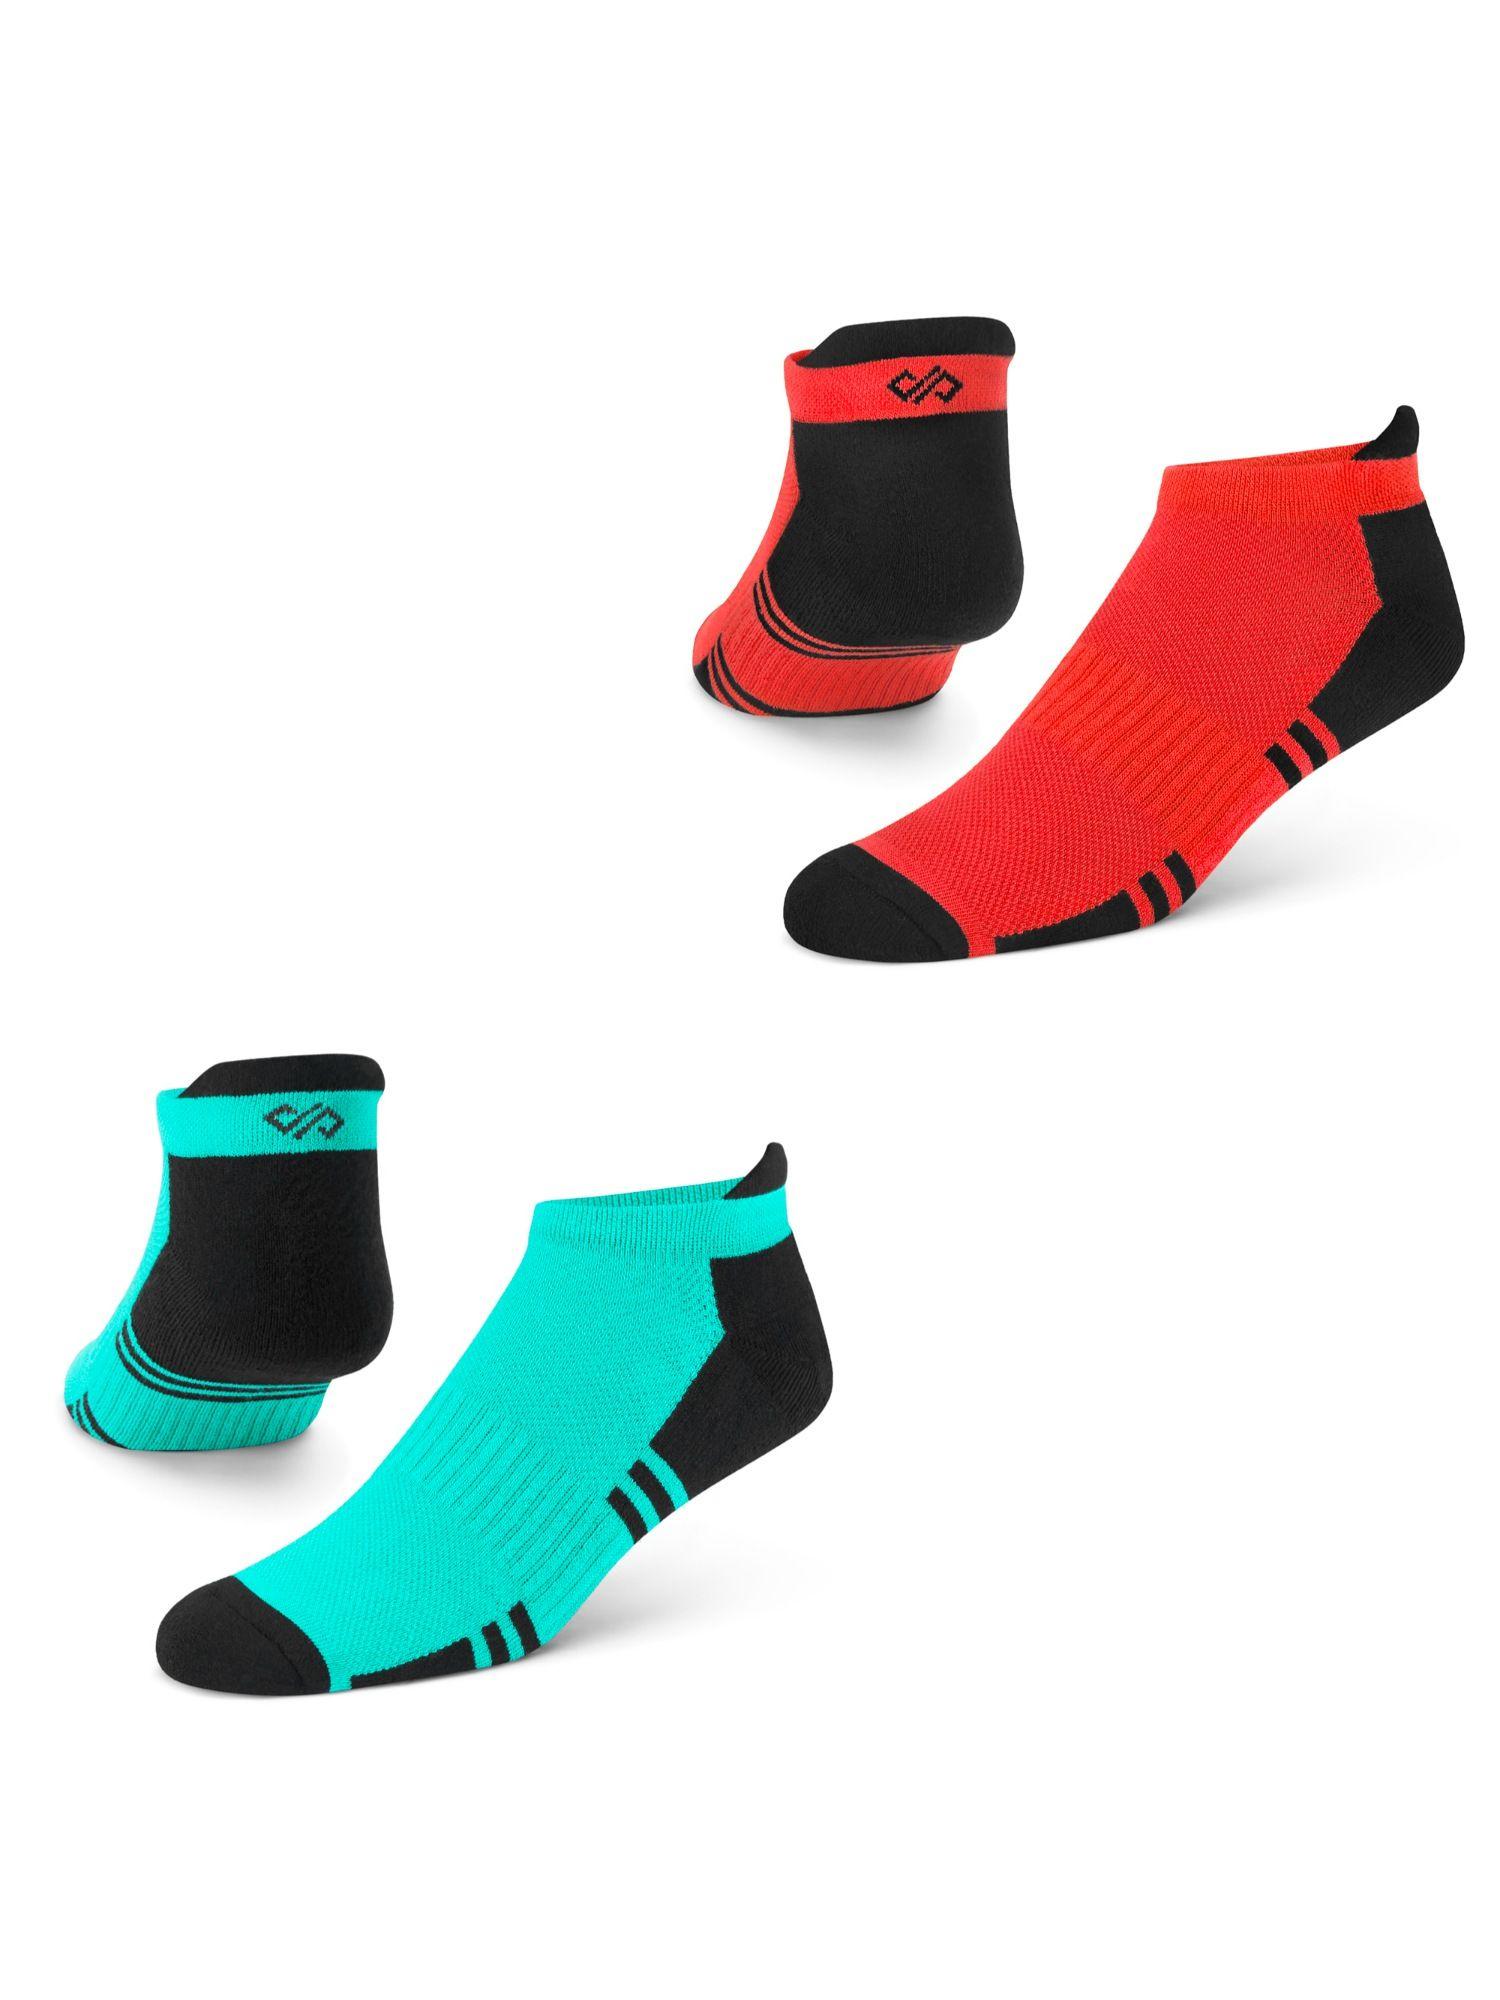 dual solid multicolor men bamboo ankle length socks - free size - pack of 2 pairs